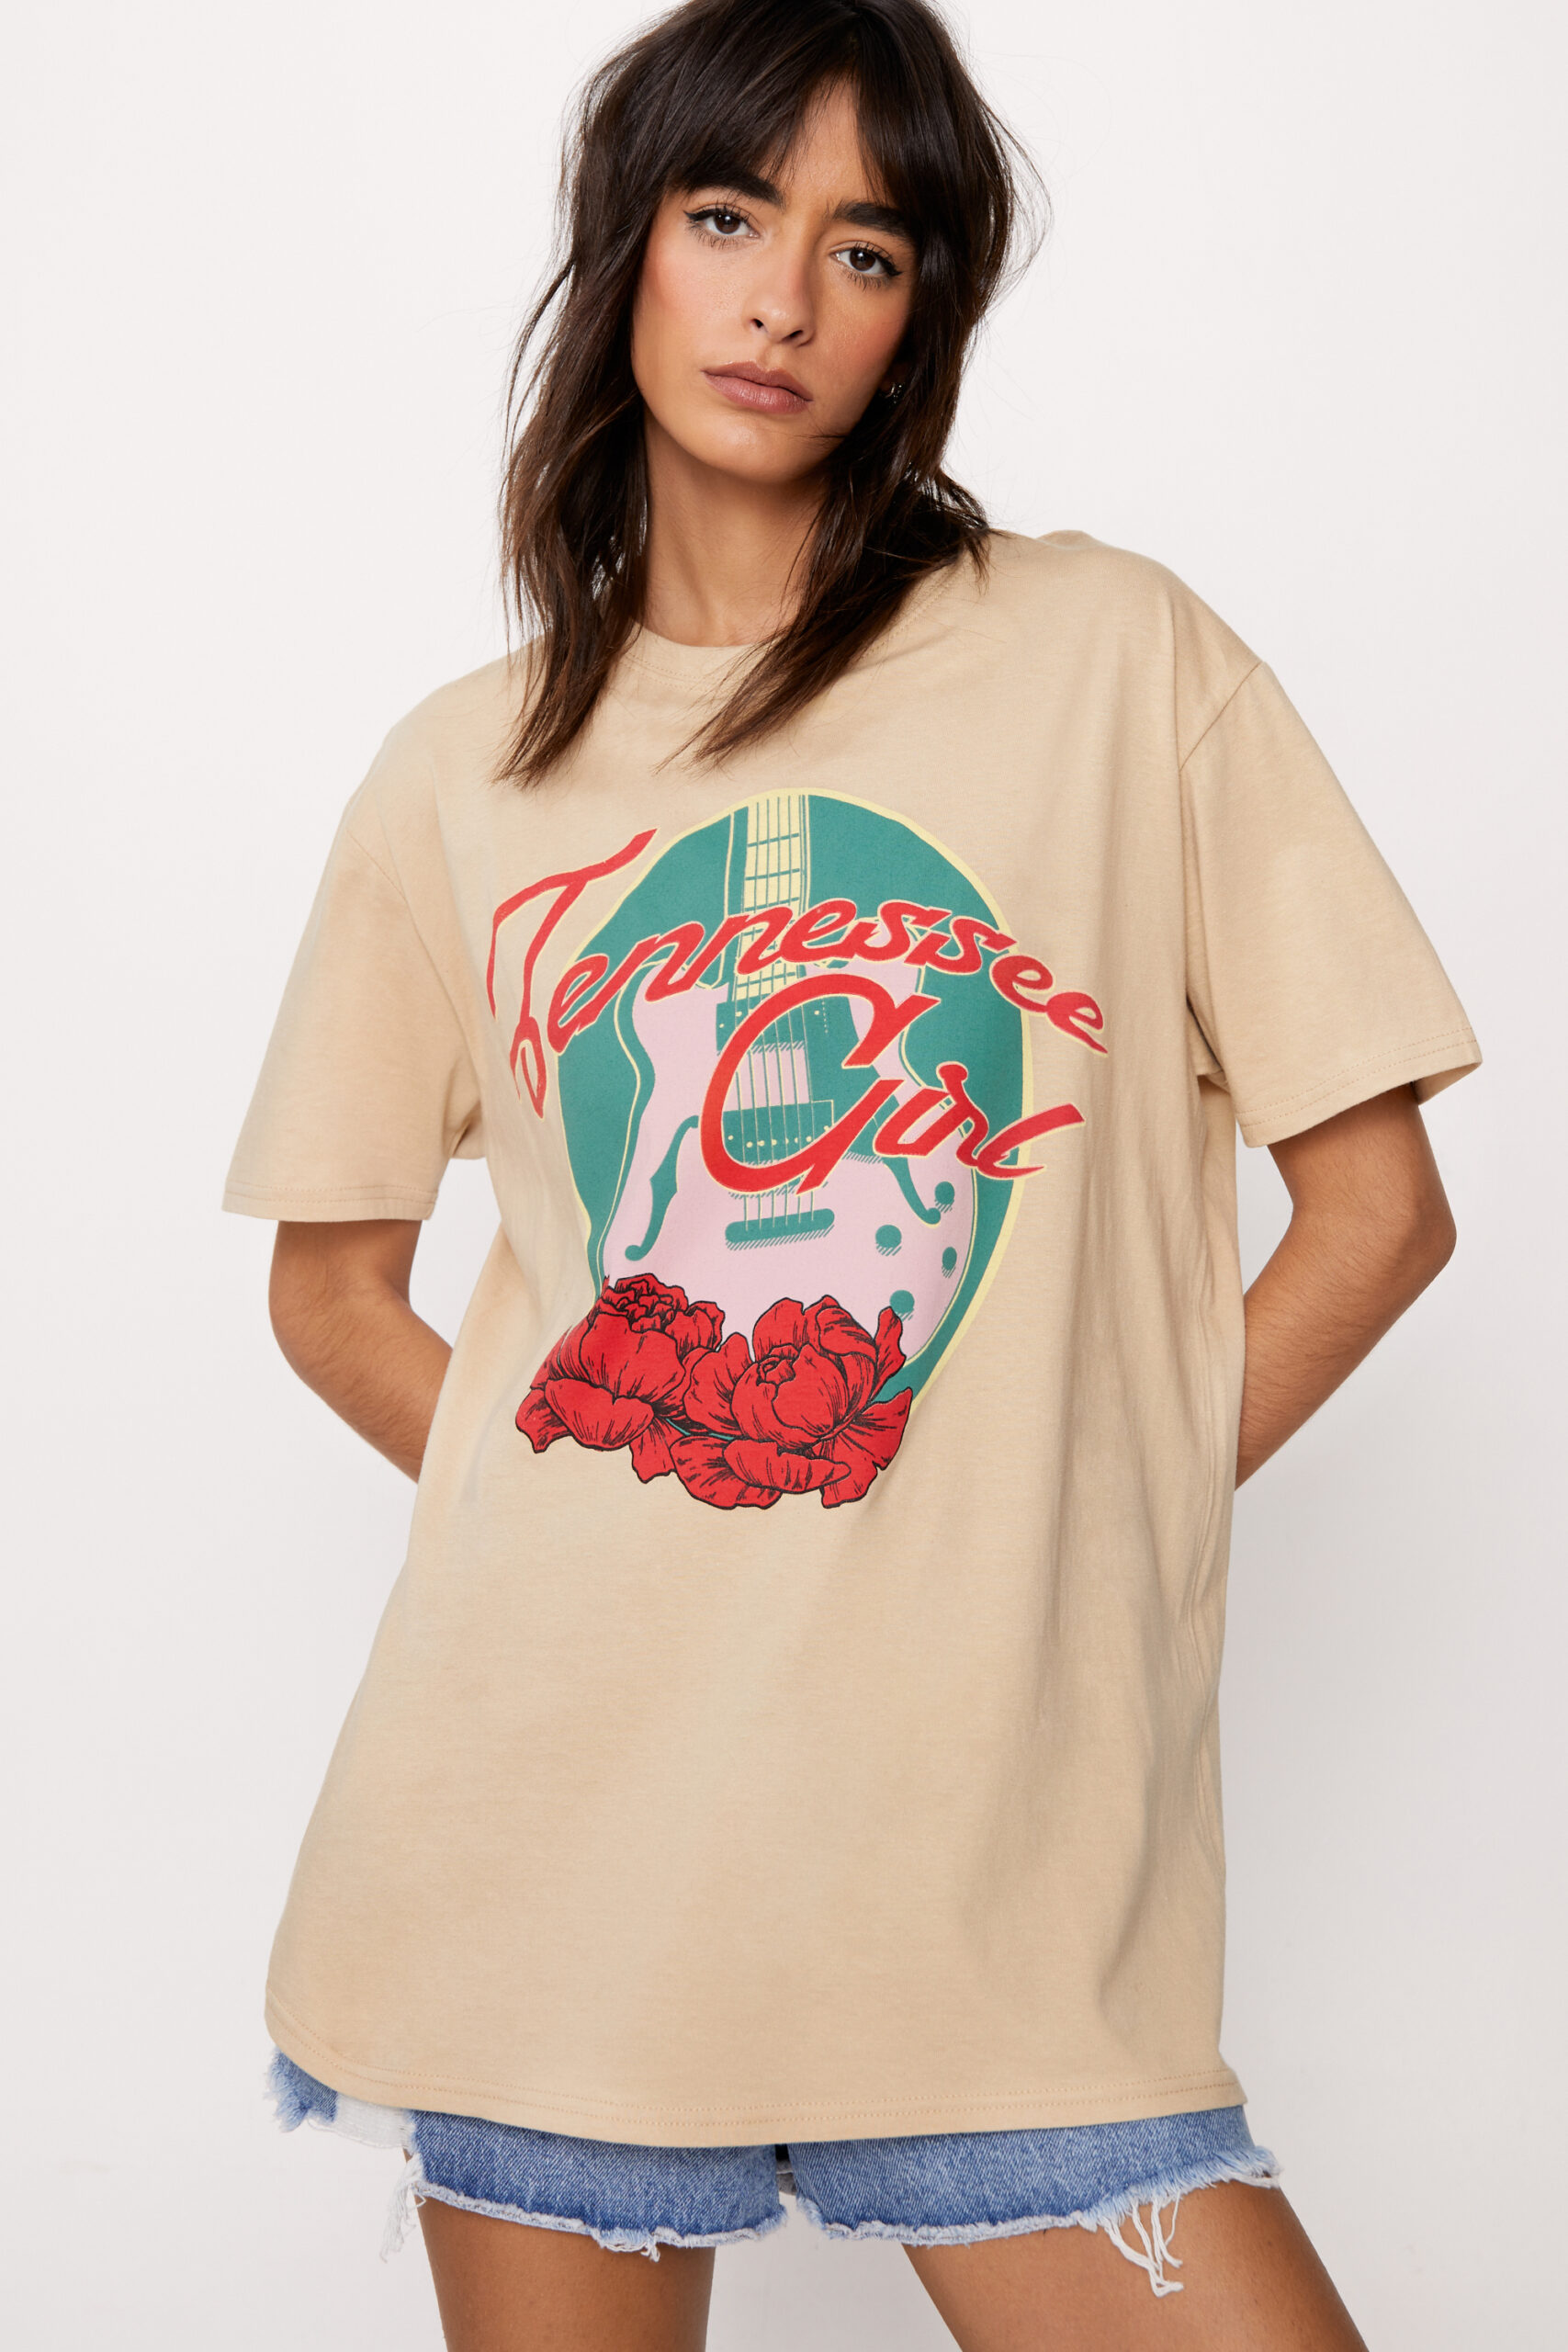 Tennessee Girl Graphic Oversized T-Shirt